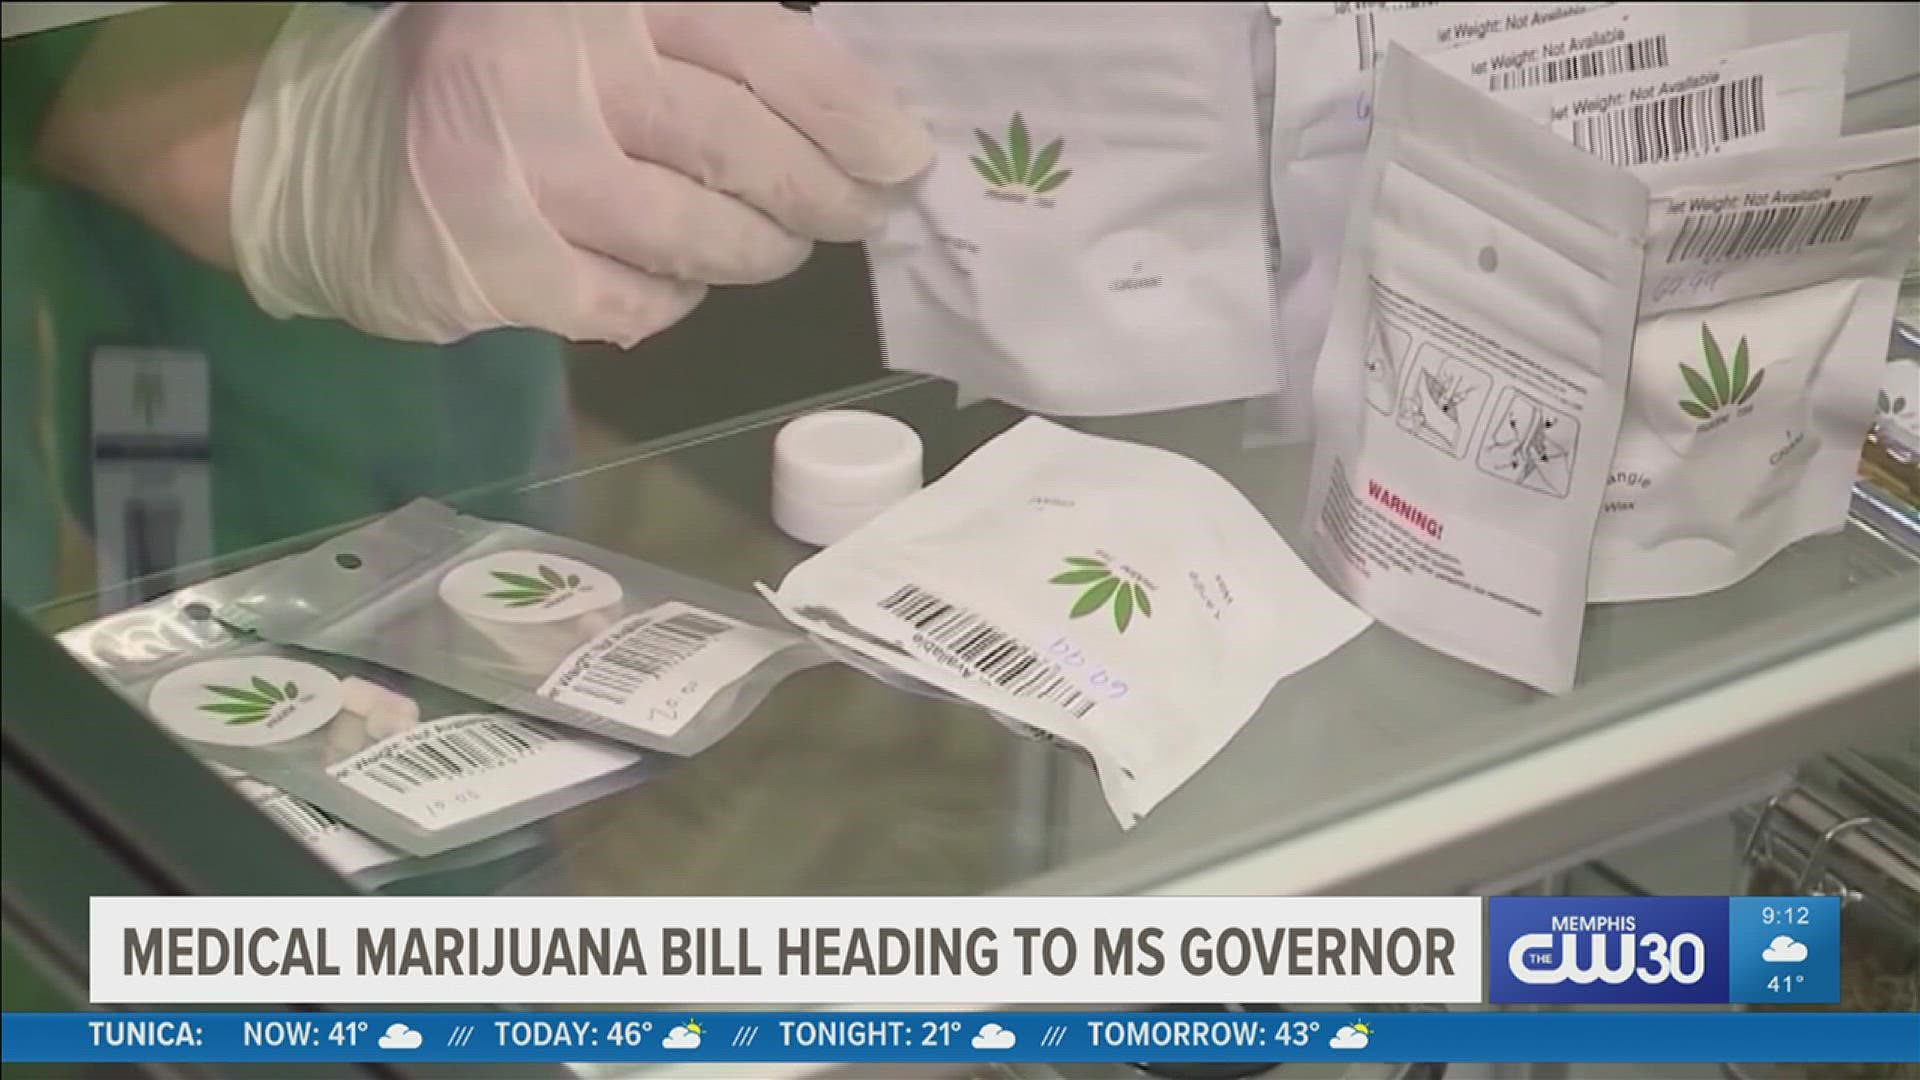 This week, the Mississippi House and Senate passed legislation on a medical marijuana program, which is now headed to the governor's desk.